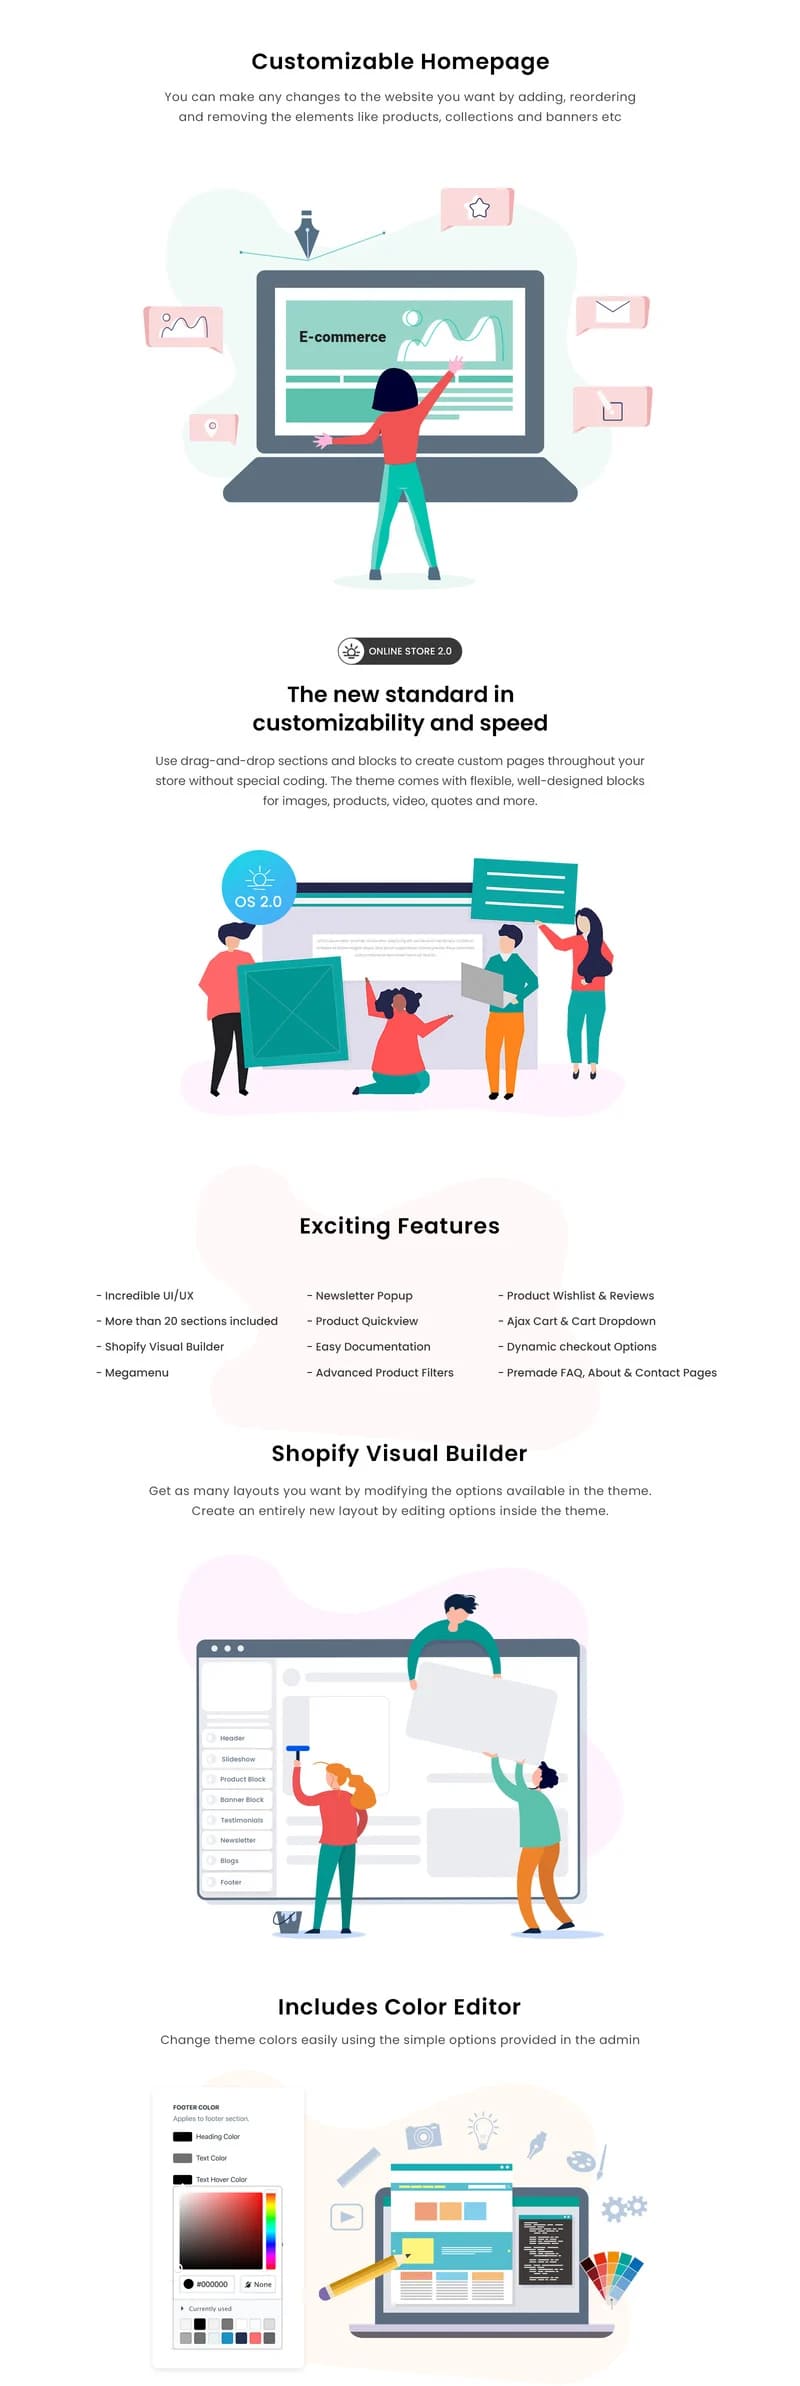 Paws pet store shopify theme, Customizable Homepage.